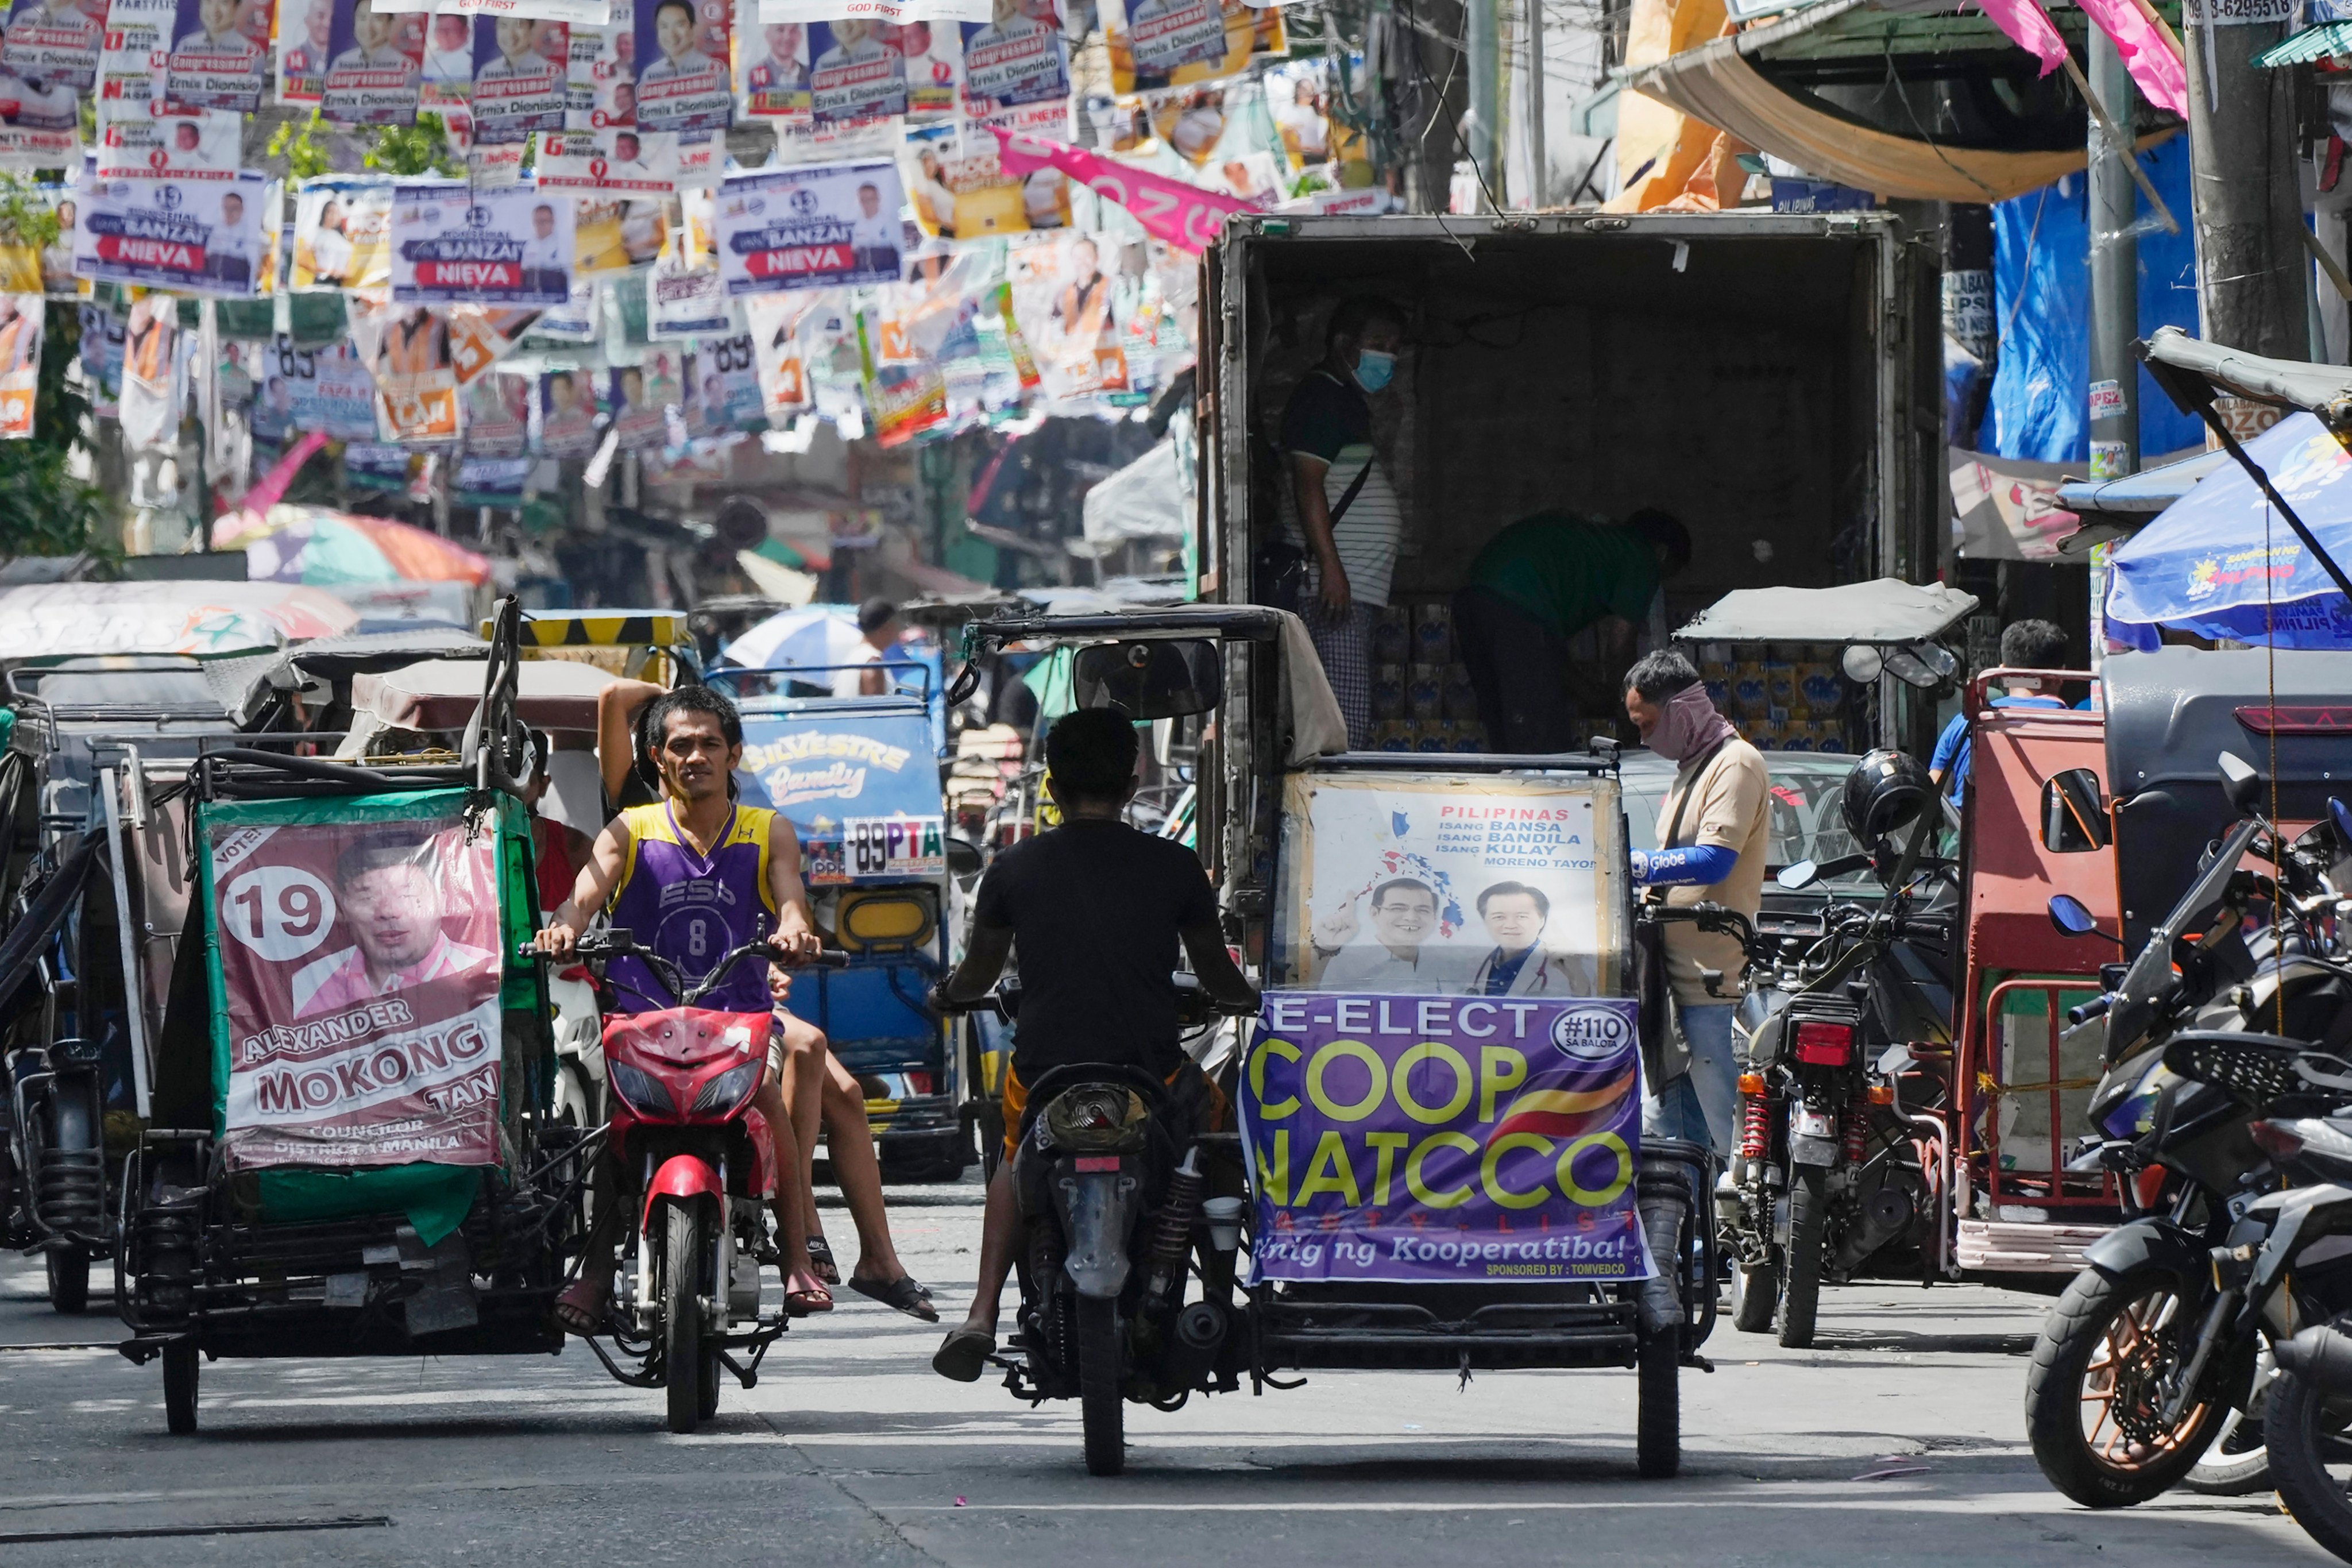 Pedicab drivers move on a street in Manila, Philippines. Economies in Asia and the Pacific need to do more to ensure workers get the education, training to raise incomes and ensure social equity, a UN report said on Tuesday. Photo: AP/File